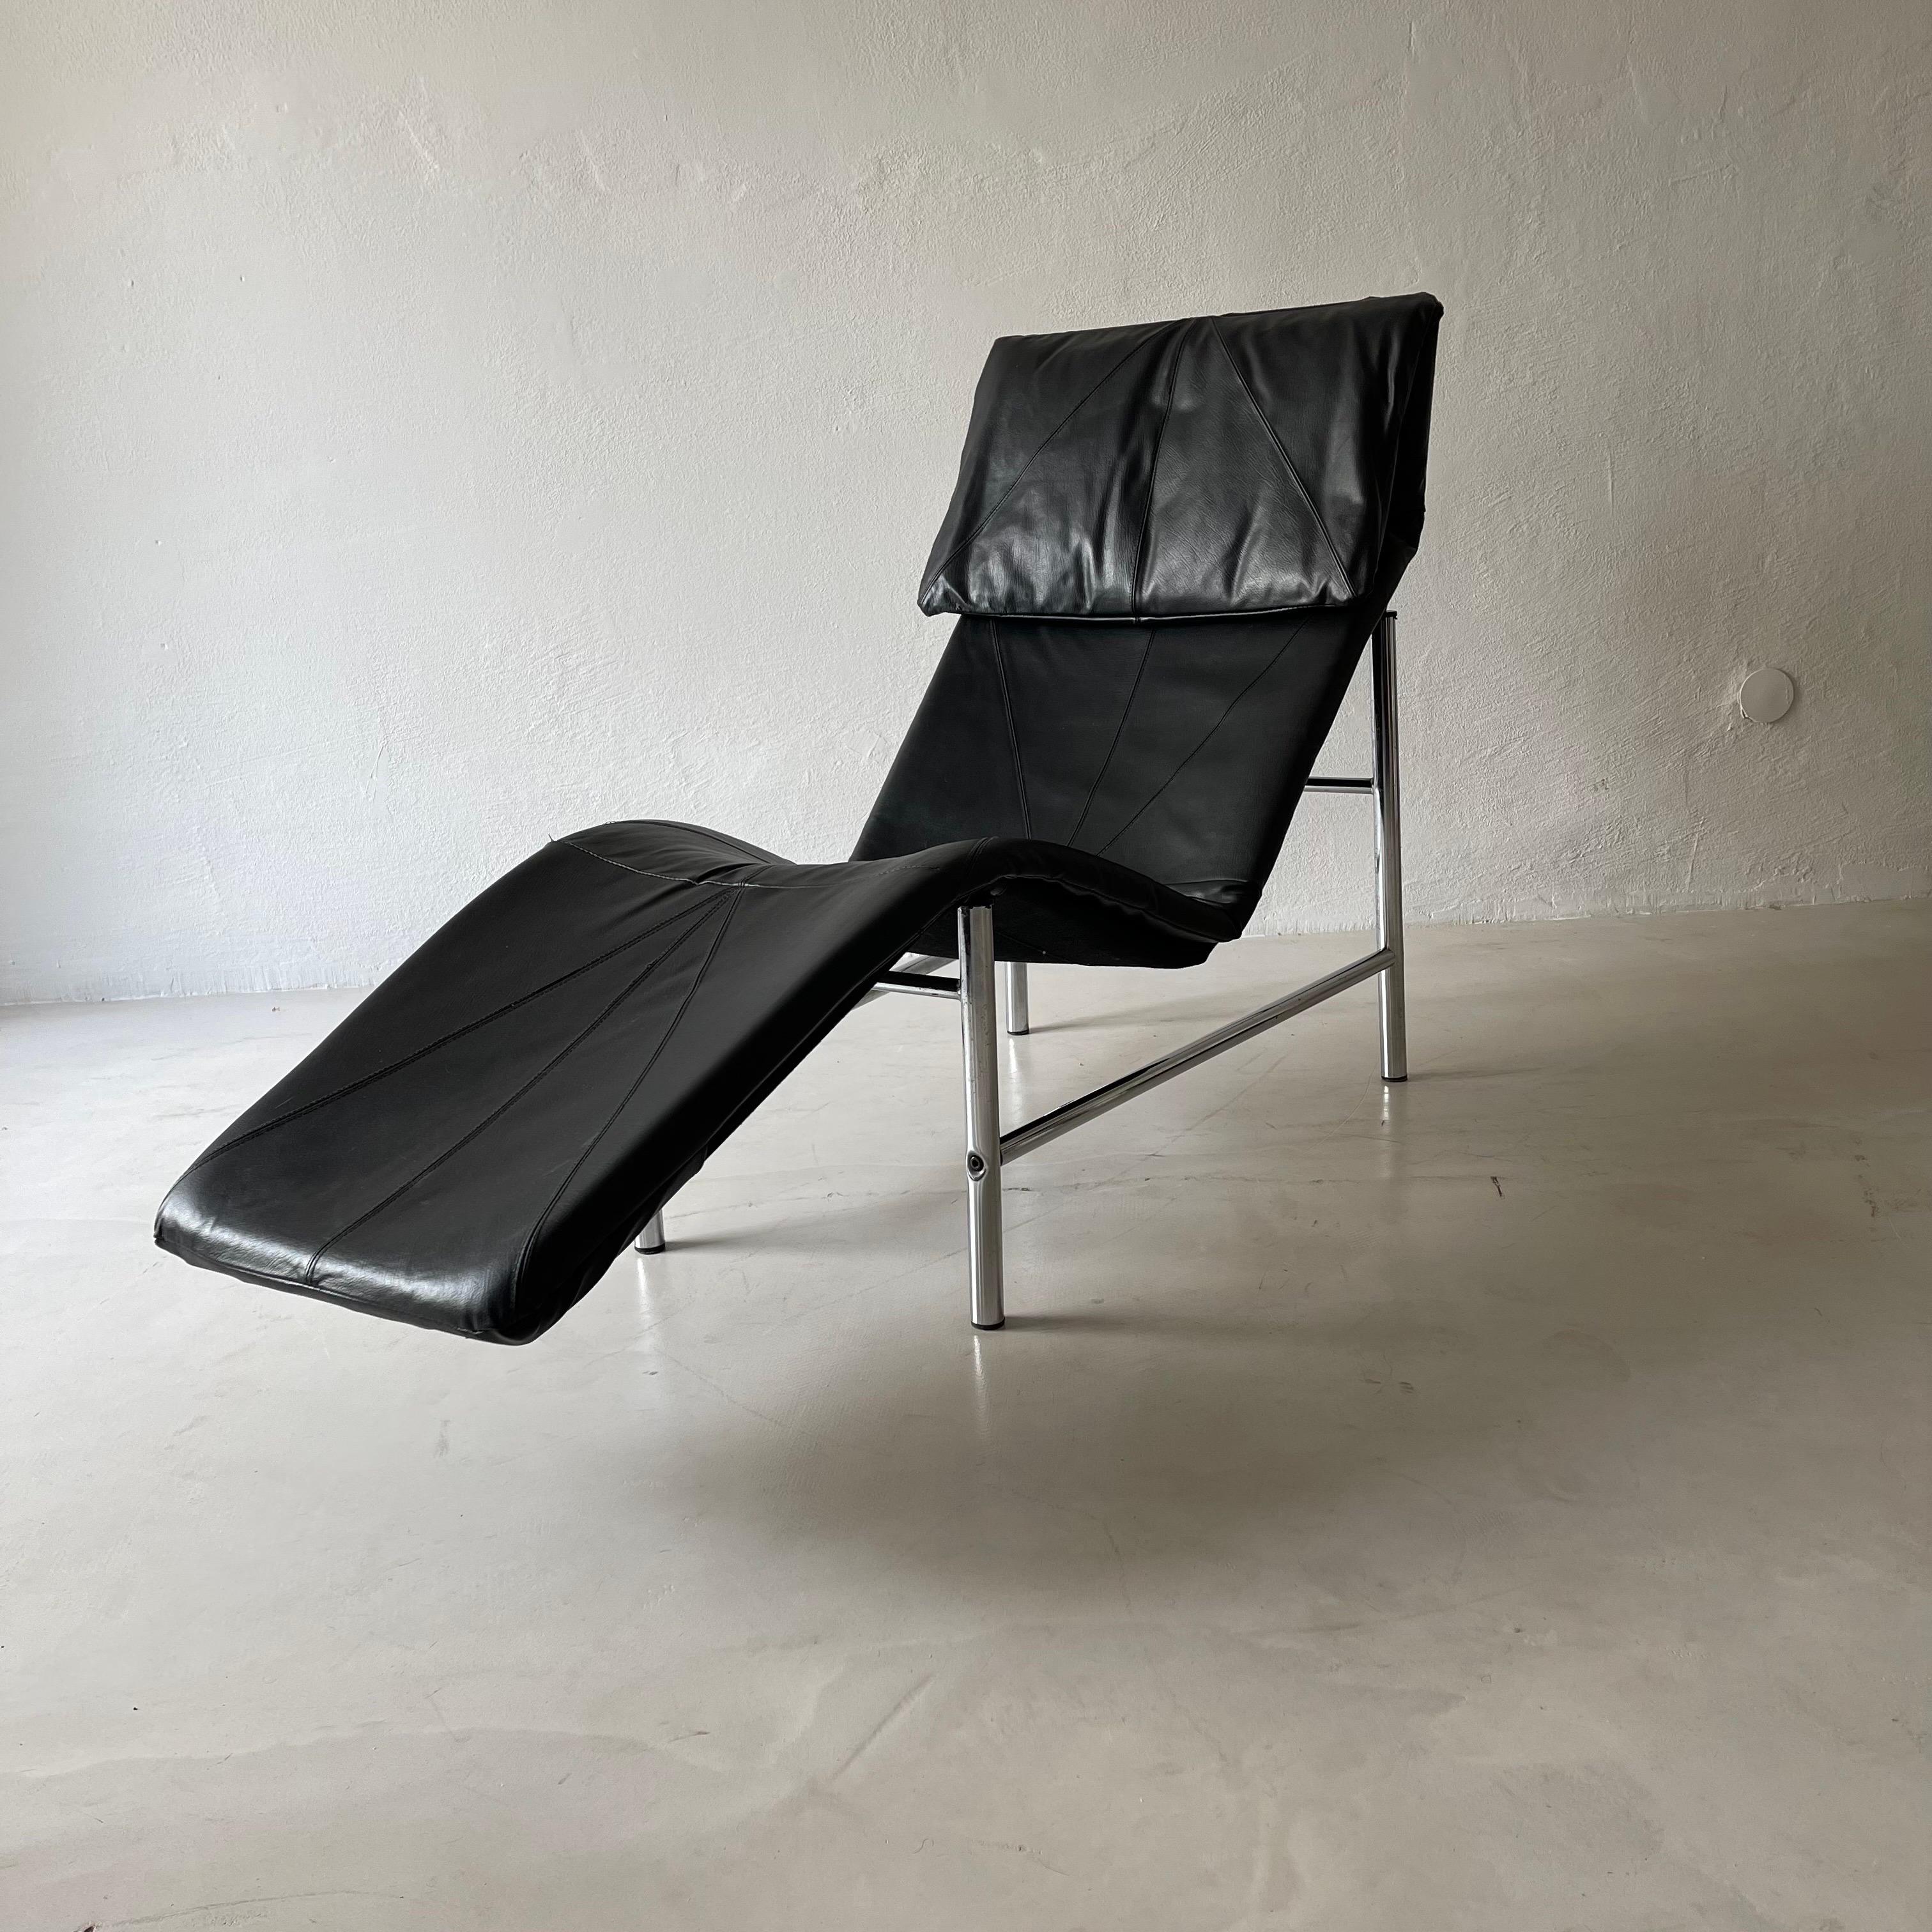 Vintage Faux Leather Chaise Longues by Tord Bjorklund Sweden, 1970 For Sale 1